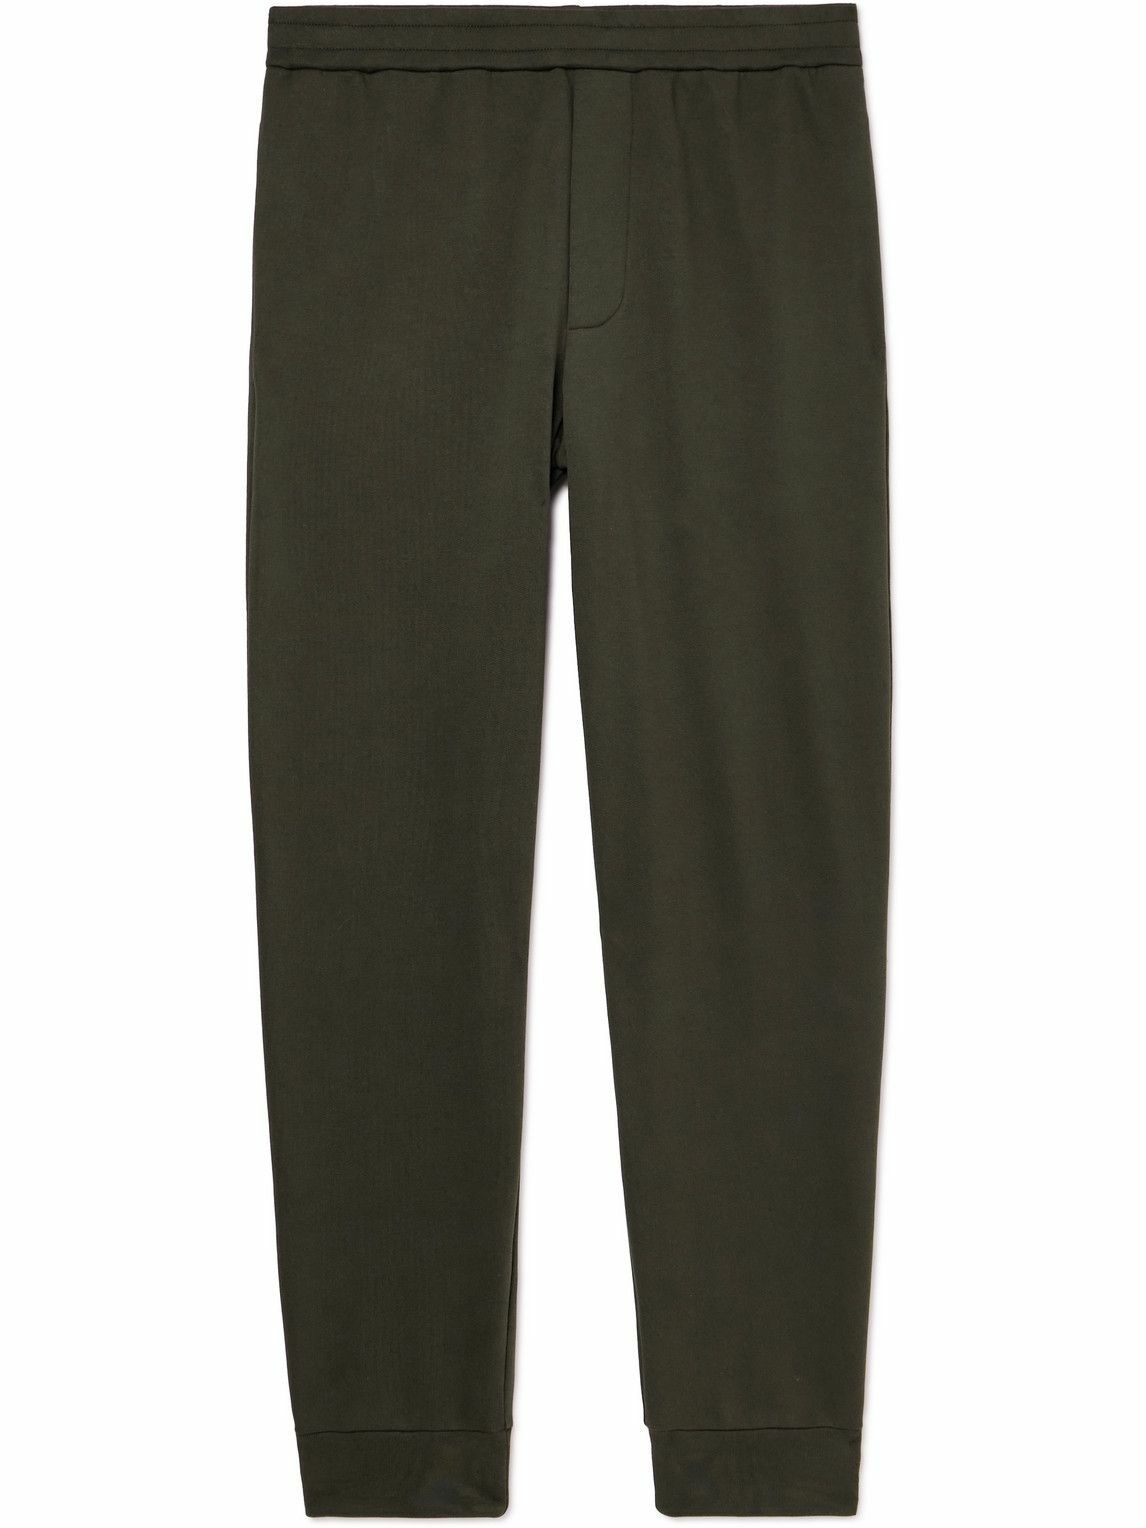 The Row - Edgar Tapered Cotton-Jersey Sweatpants - Gray The Row